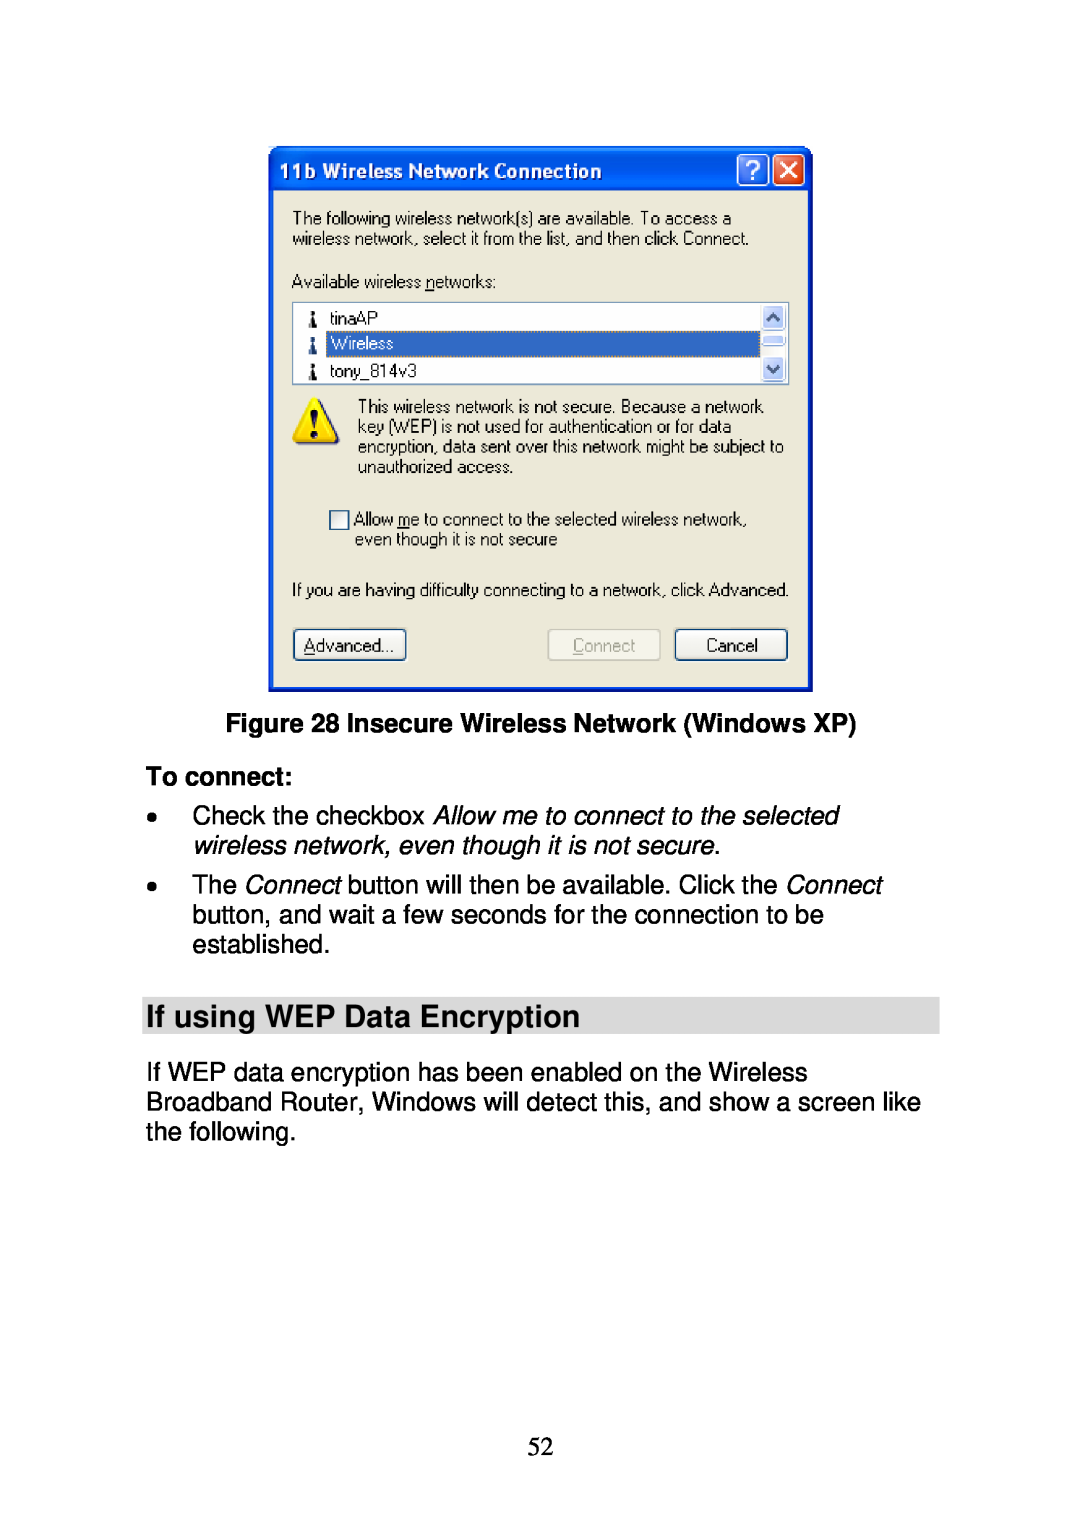 3Com WBR-6000 user manual If using WEP Data Encryption, Insecure Wireless Network Windows XP To connect 